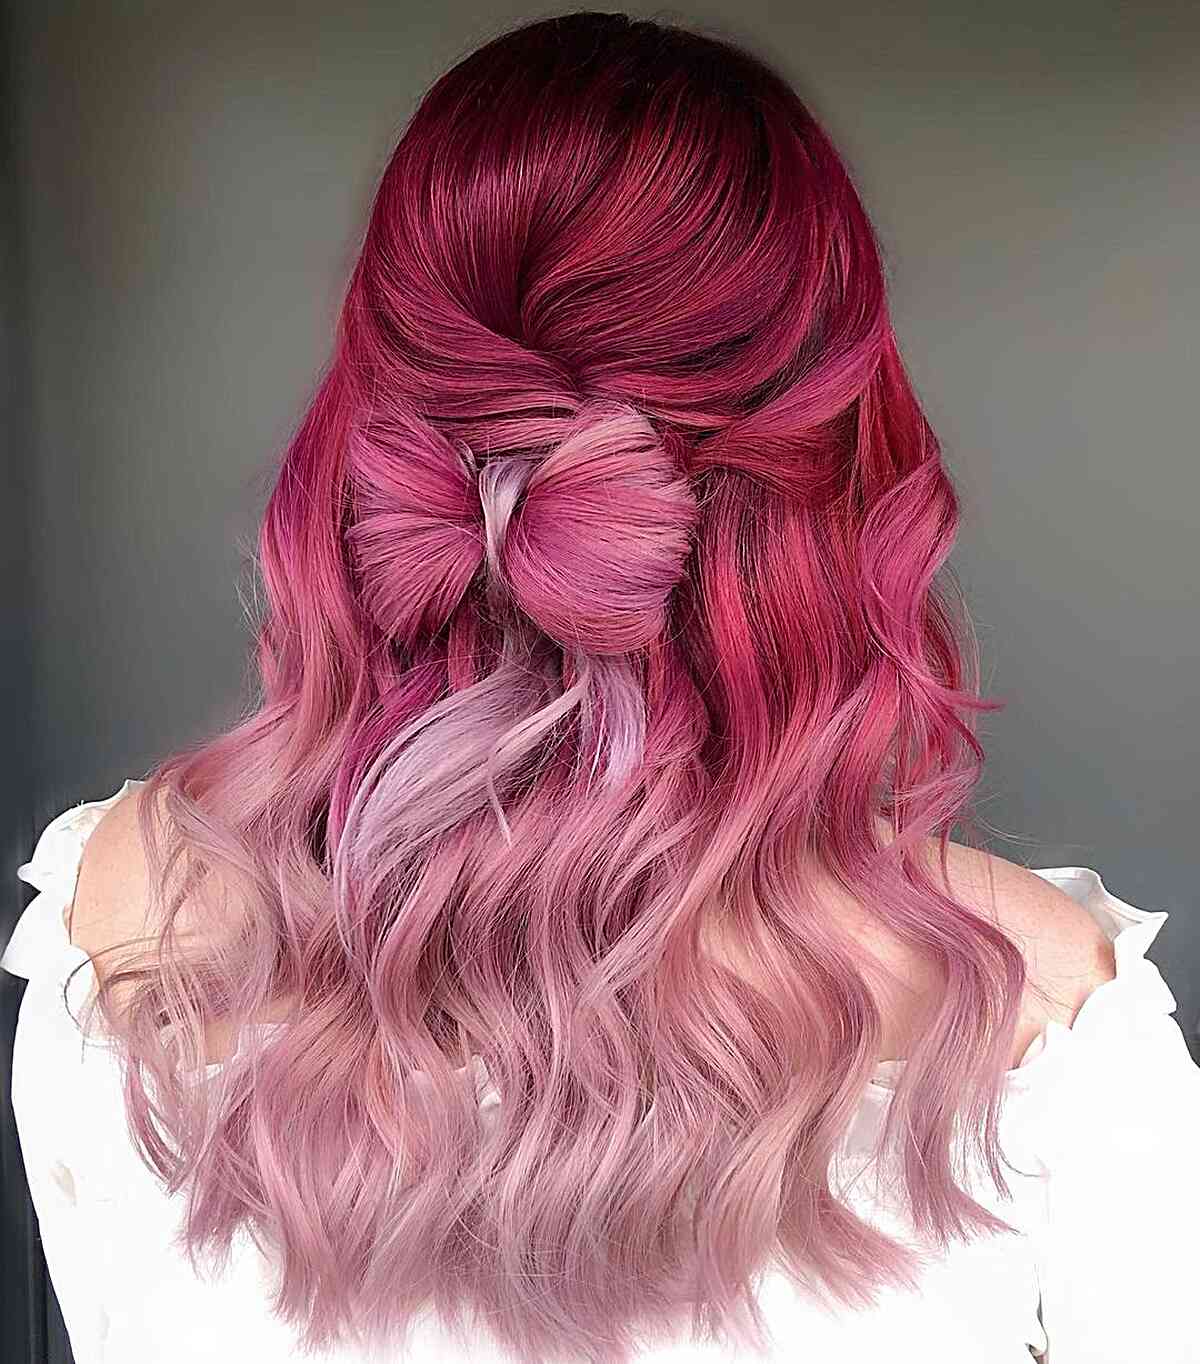 Medium Festival Pink Ombre Hair with Bow Tie Style